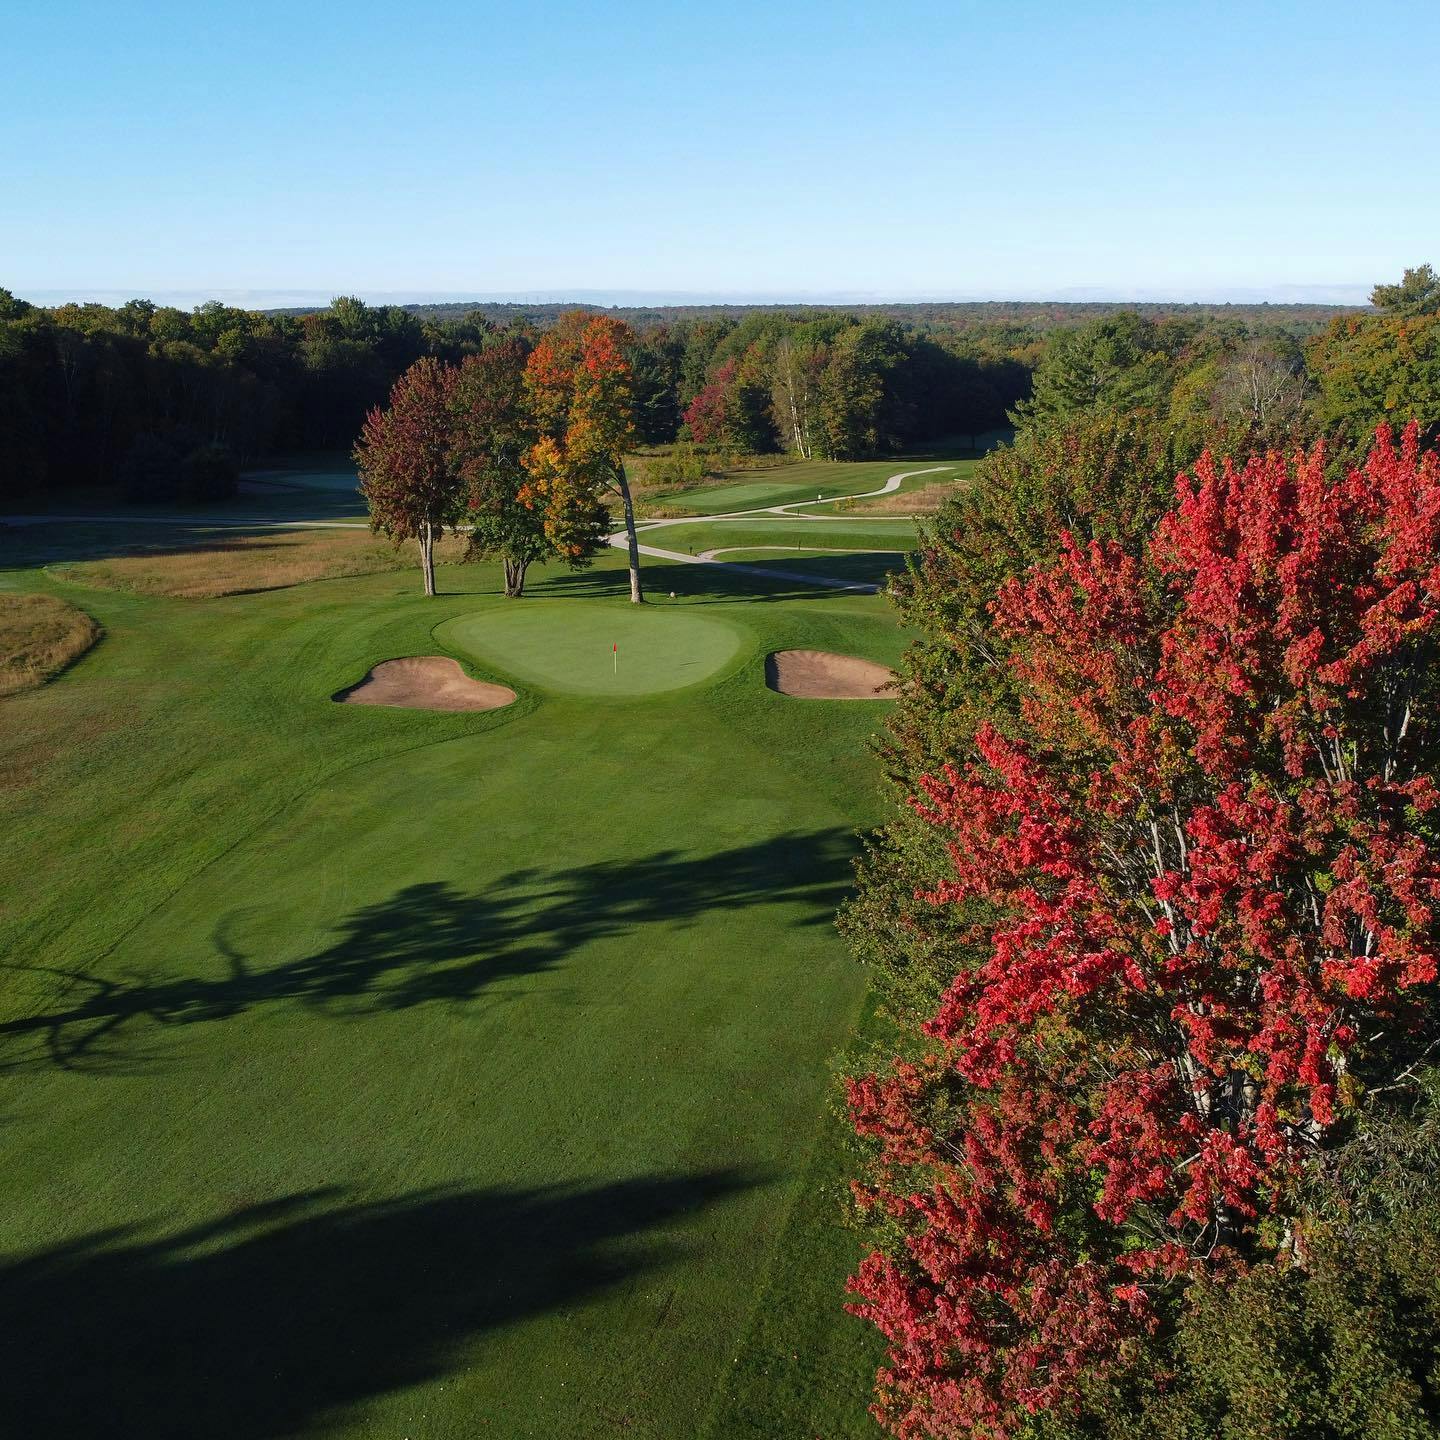 #FallGolf is officially here 🍂🍁